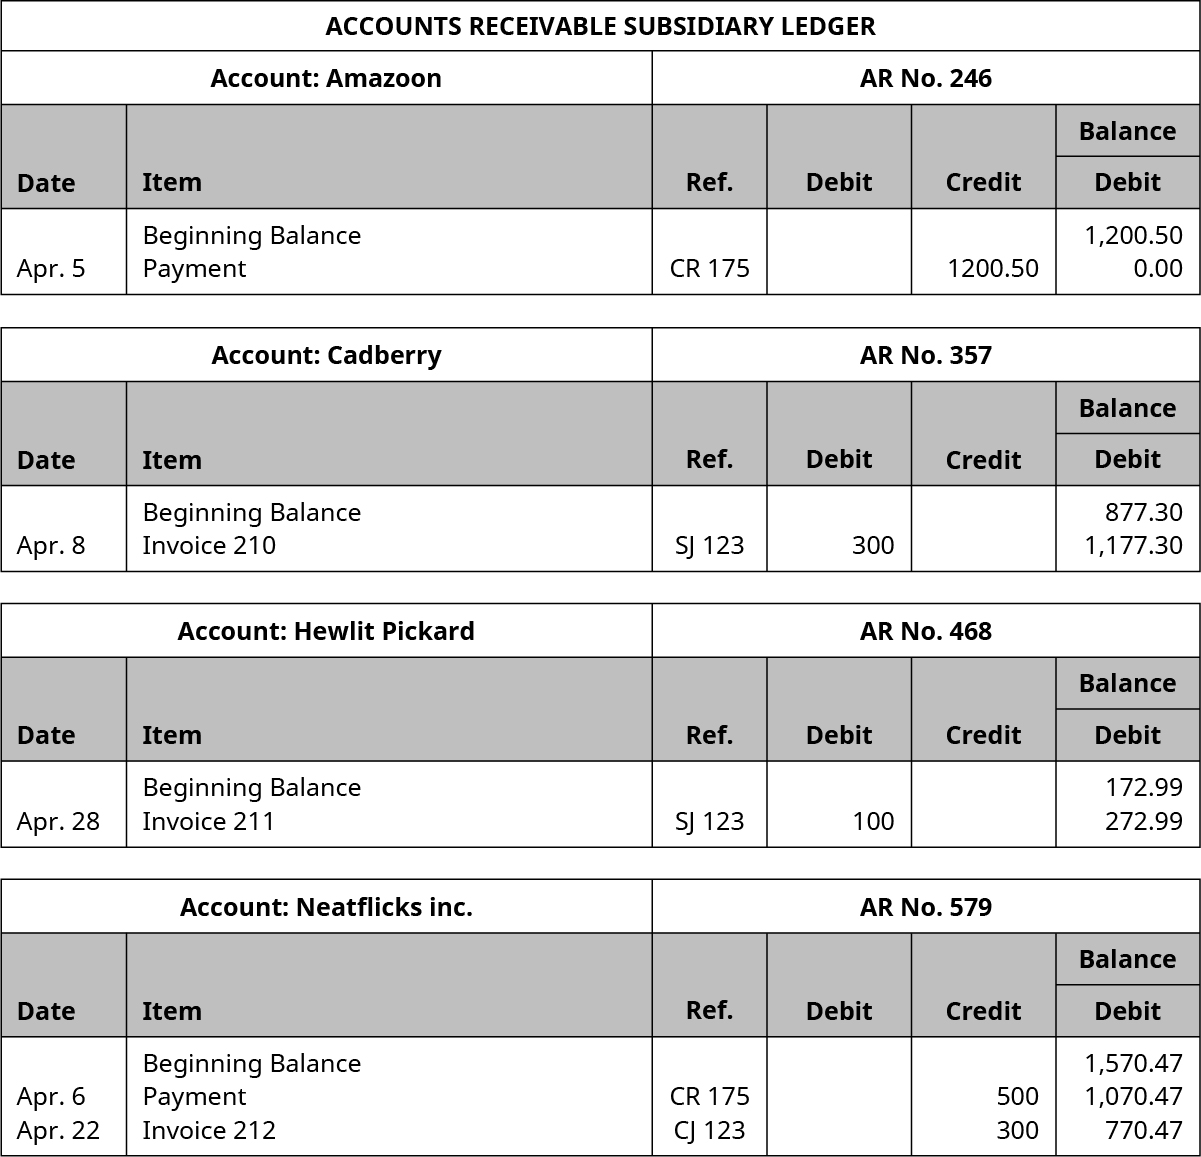 Accounts Receivable Subsidiary Ledger. Six Columns, labeled left to right: Date, Item, Reference, Debit, Credit, Balance. Amazoon Account, AR Number 246. Line One: Blank; Beginning Balance; Blank; Blank; Blank; 1,200.50. Line Two: April 5; Payment; CR 175; Blank; 1,200.50; 0.00. Cadberry Account, AR Number 357. Line One: Blank; Beginning Balance; Blank; Blank; Blank; 877.30. Line Two: April 8; Invoice 210; SJ 123; 300; Blank; 1,177.30. Hewlit Pickard Account, AR Number 468. Line One: Blank; Beginning Balance; Blank; Blank; Blank; 172.99. Line Two: April 28; Invoice 211; SJ 123; 100; Blank; 272.99. Neatflicks, Inc. Account, AR Number 579. Line One: Blank, Beginning Balance; Blank; Blank; Blank; 1,570.47. Line Two: April 6; Payment; CR 175; Blank; 500; 1,070.47. Line Three: April 22; Invoice 212; CJ 123; Blank; 300; 770.47.